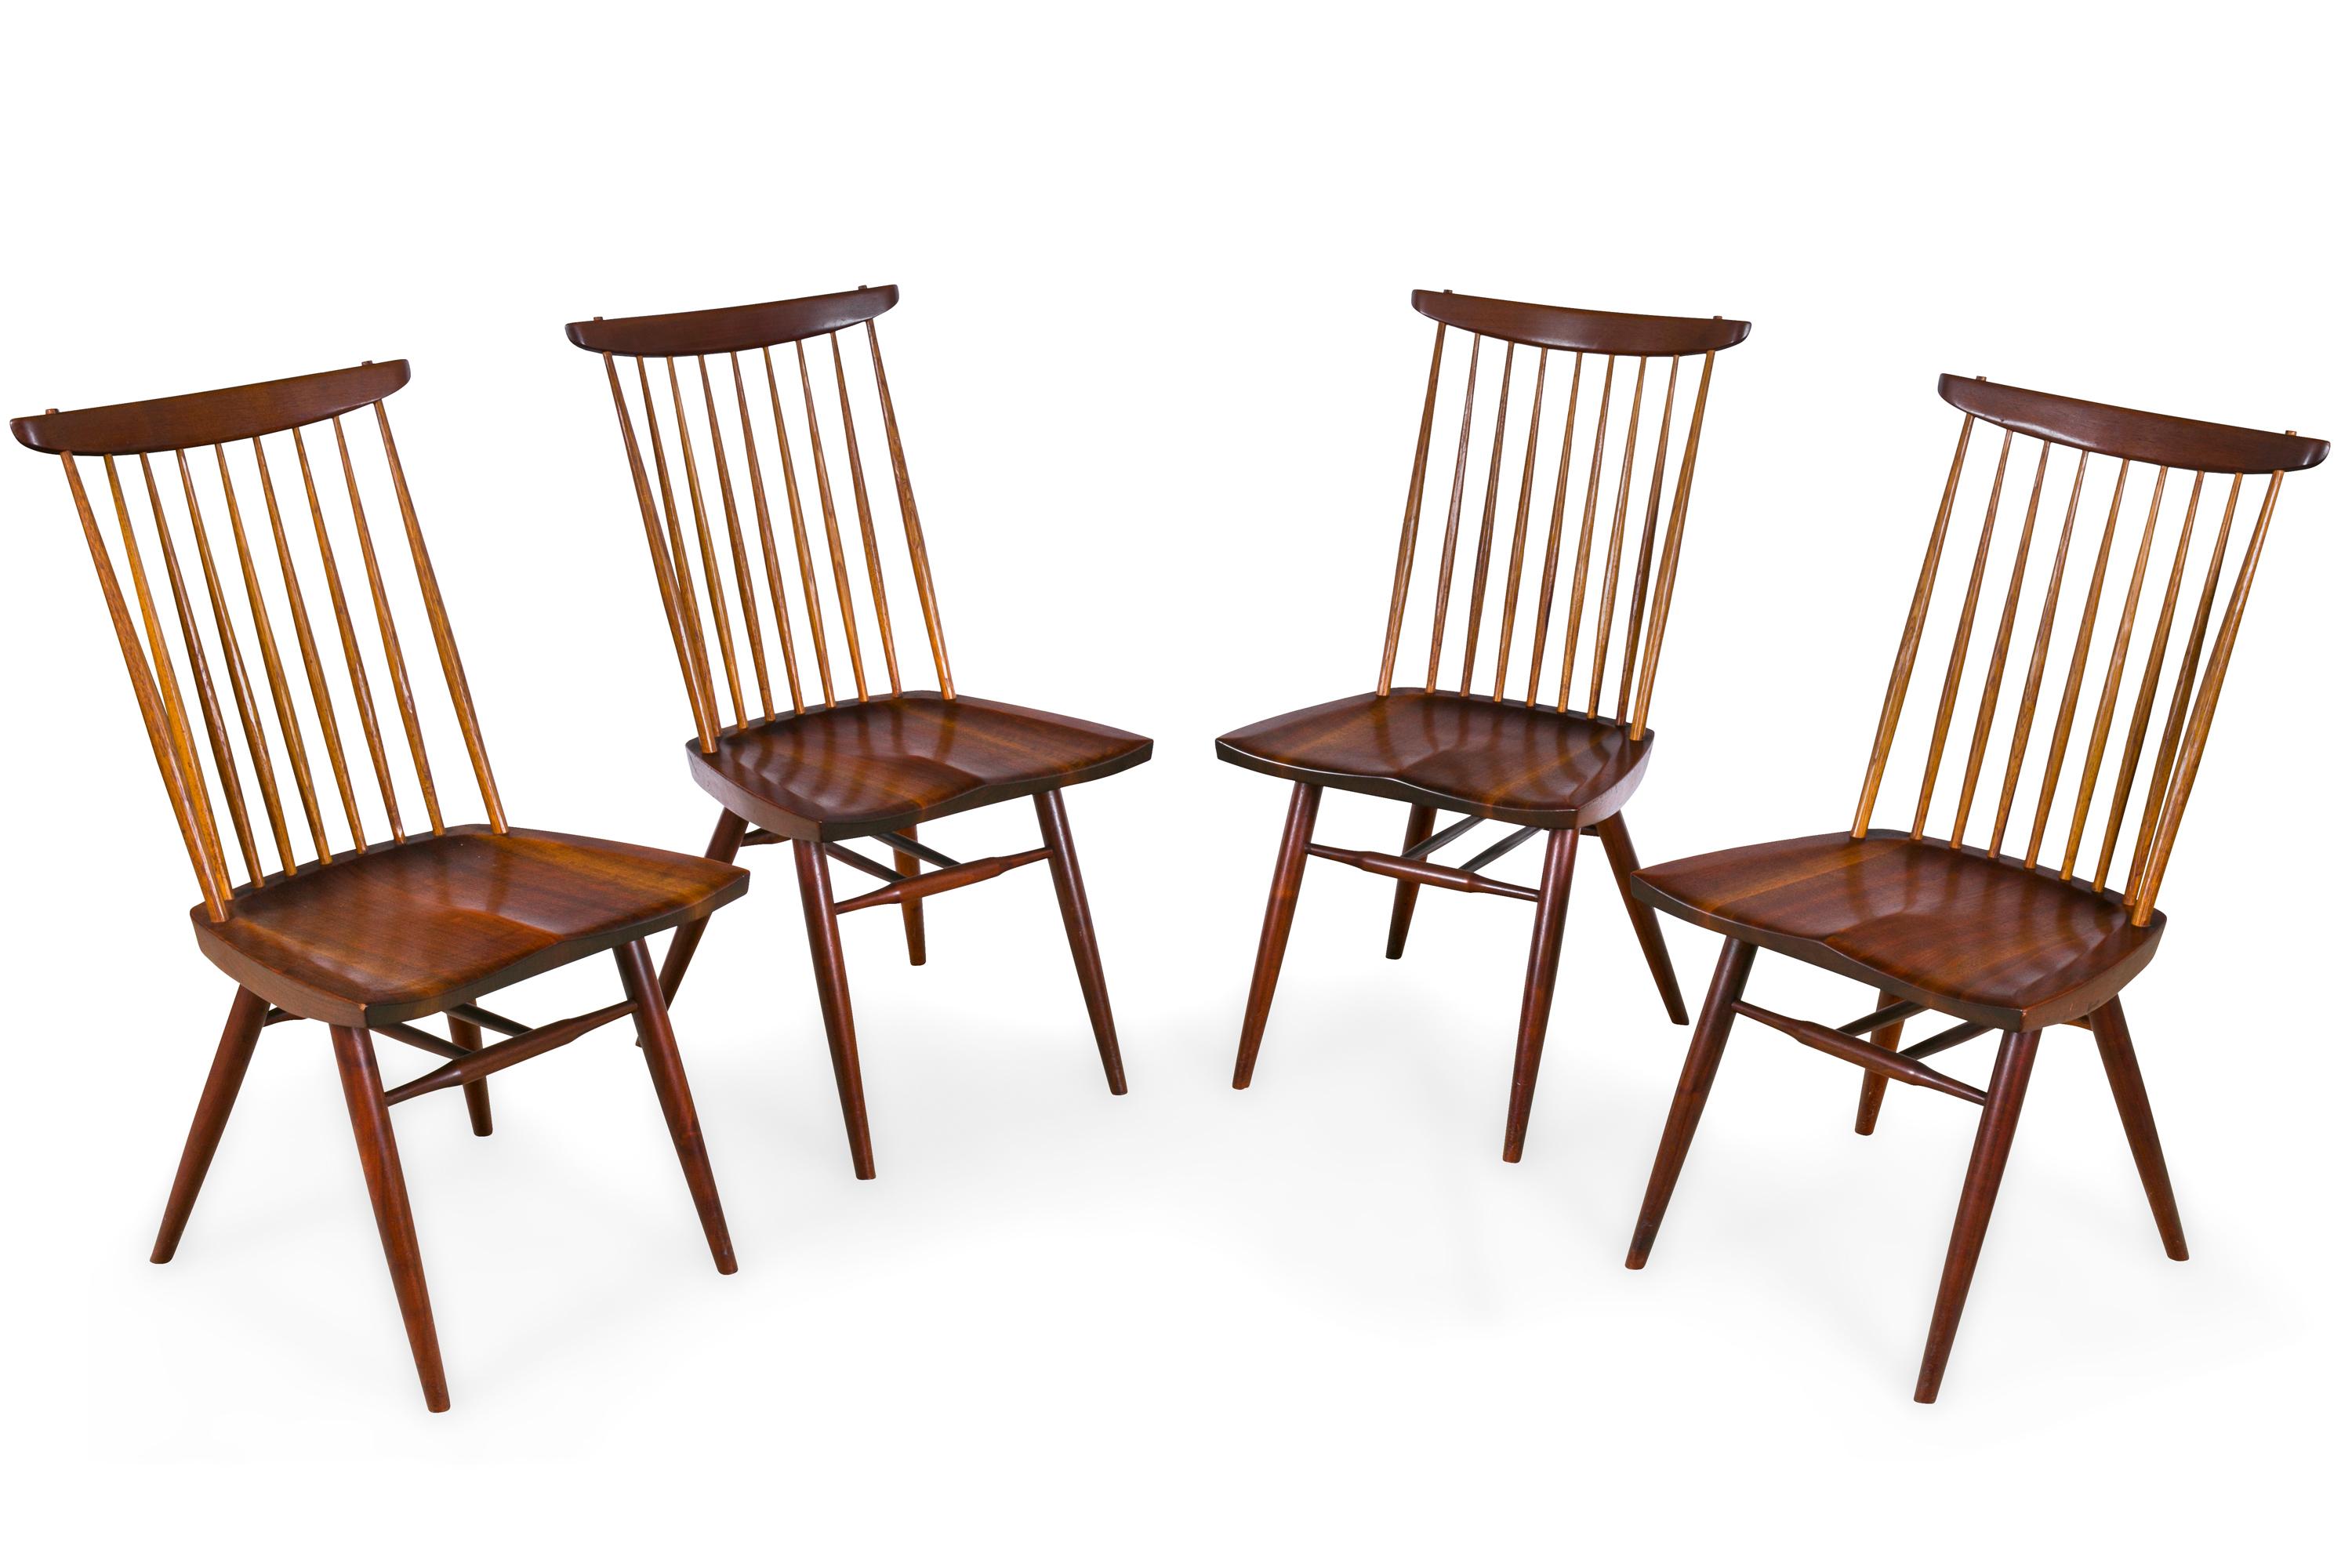 This simply elegant chair was designed in 1956 and is reminiscent of the Classic Windsor chairs of the past.